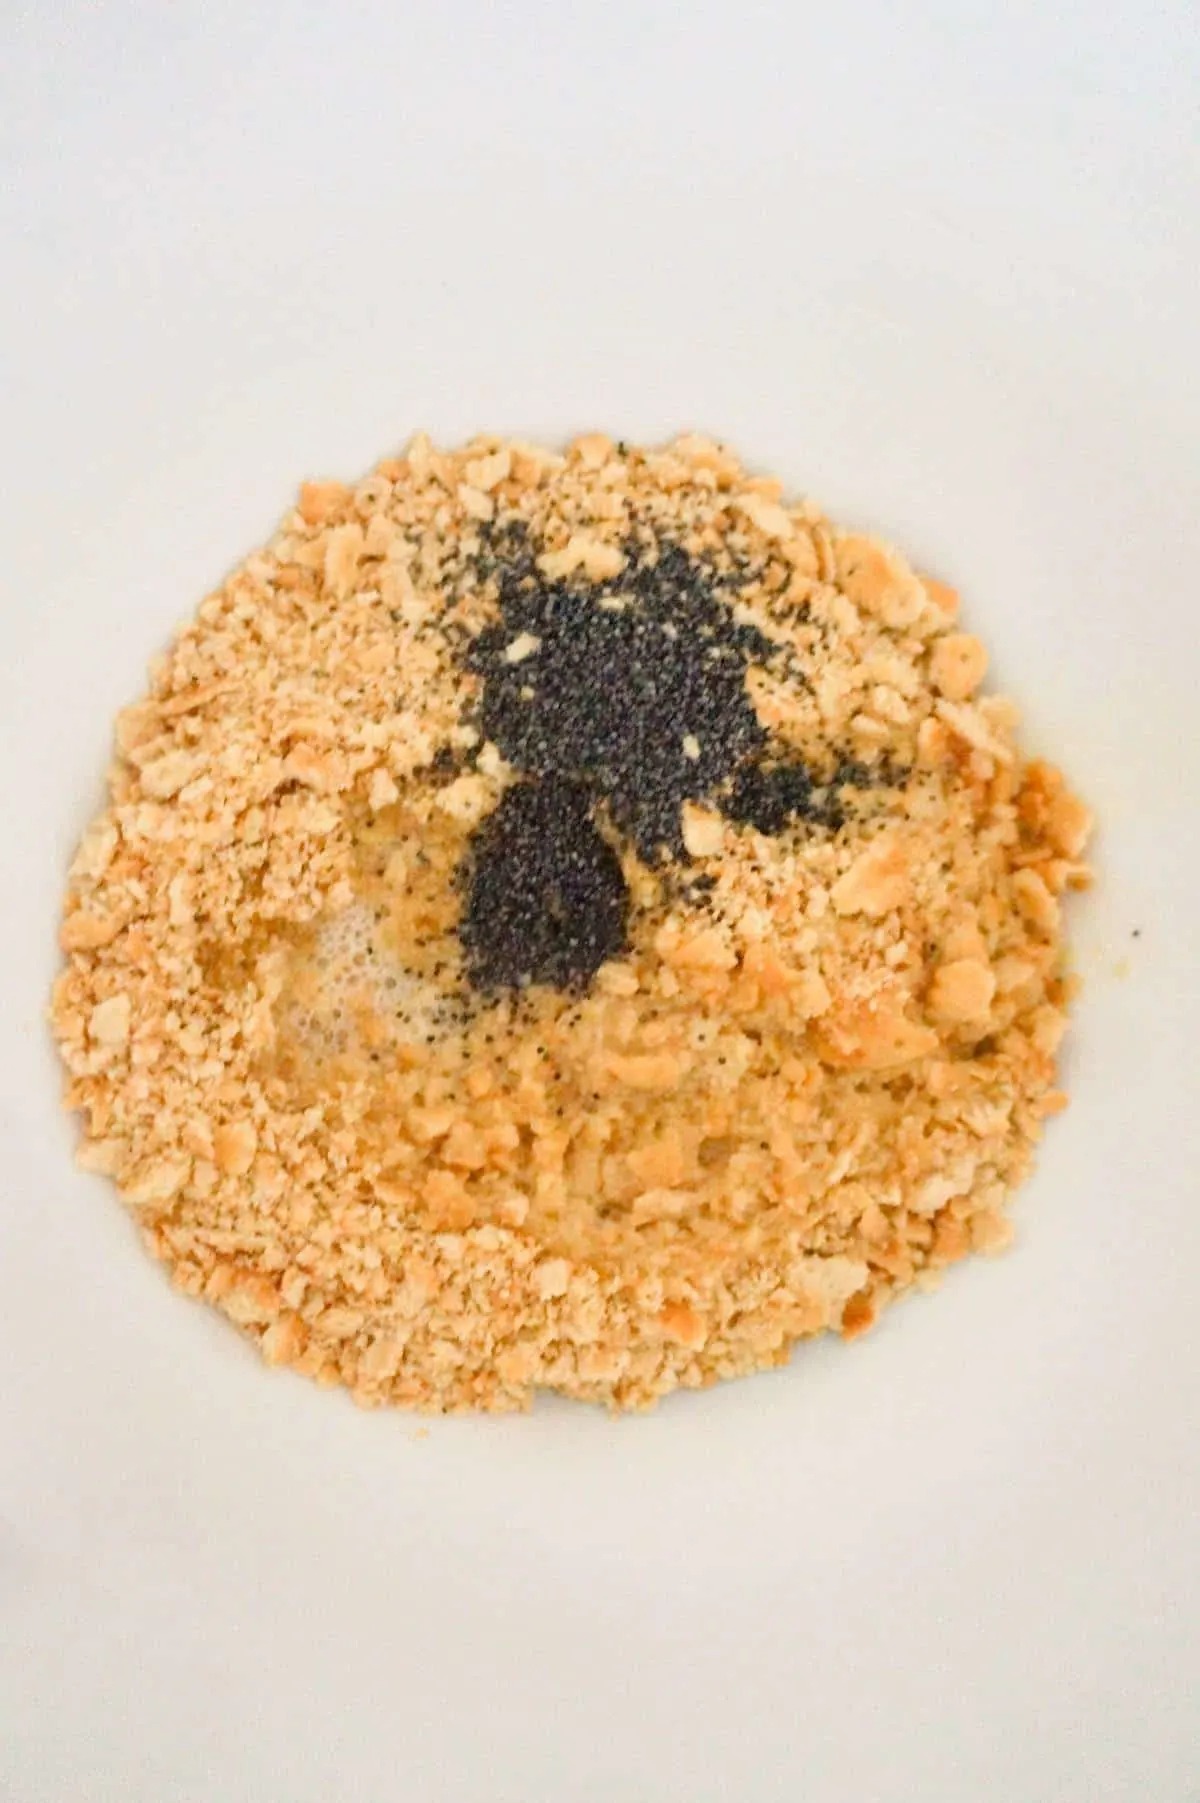 poppy seeds, melted butter and Ritz cracker crumbs in a mixing bowl